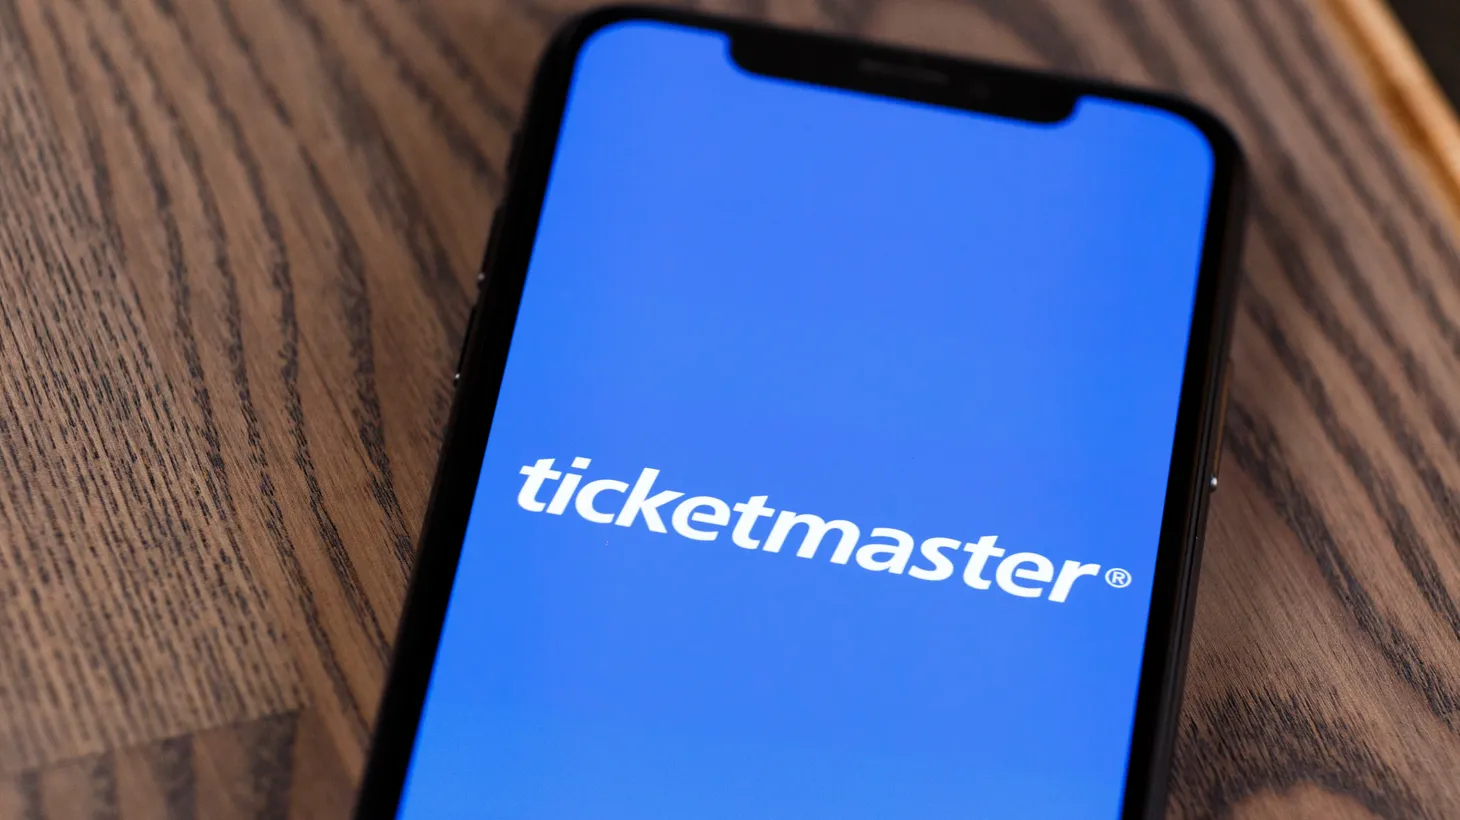 “If you look at the big events, the top 100 arenas in this country, Ticketmaster has exclusive contracts with 80 of them. And the fact that Ticketmaster has this relationship with Live Nation means that it has deep pockets, so that it can go out and secure new clients or maintain the clients that it has,” says Dean Budnick.